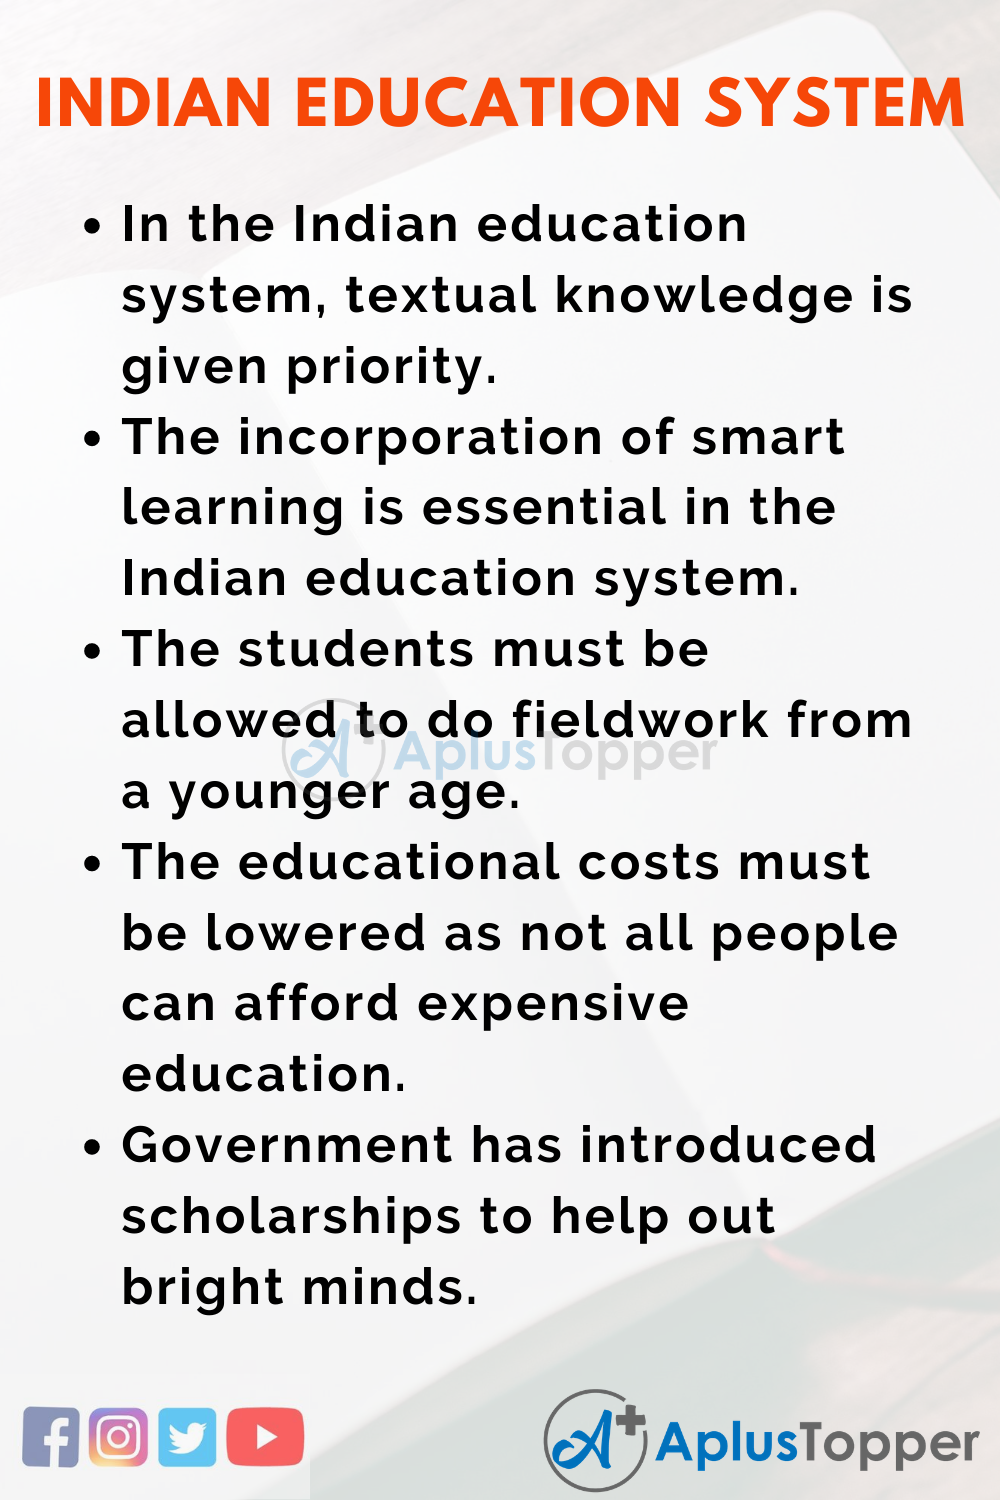 speech on current education system in india